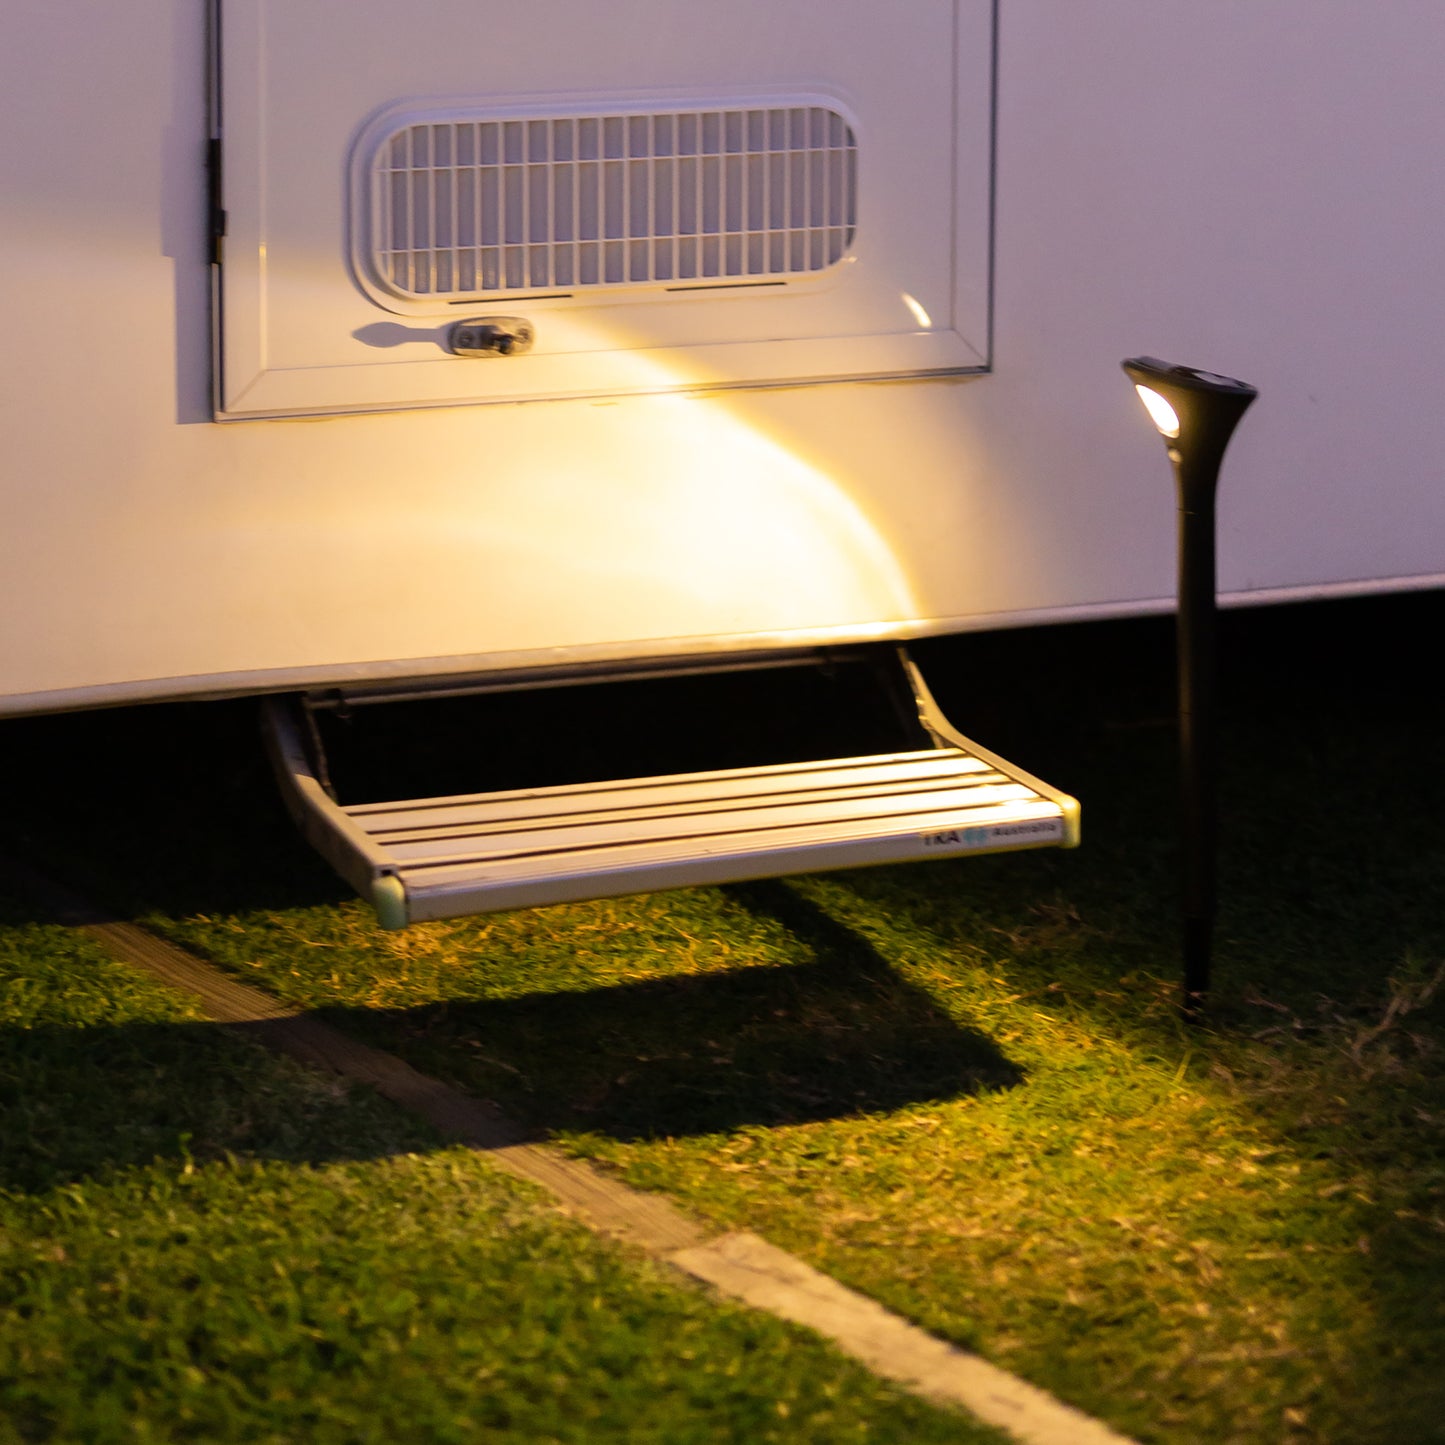 solar garden path light illuminates the step and entry to a mobile home